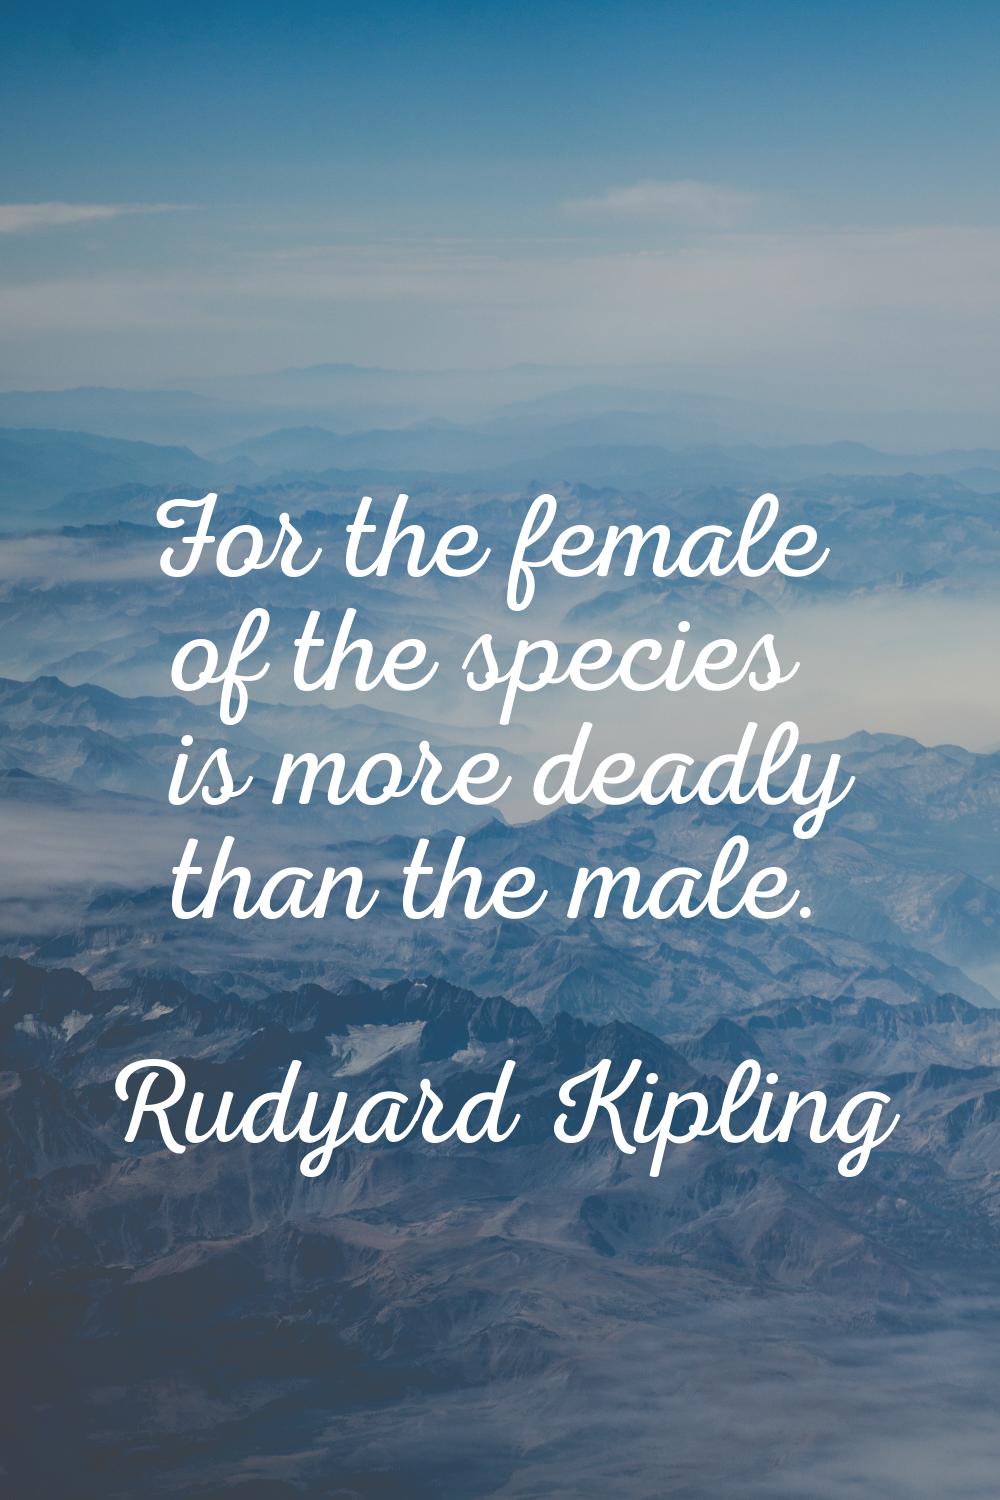 For the female of the species is more deadly than the male.